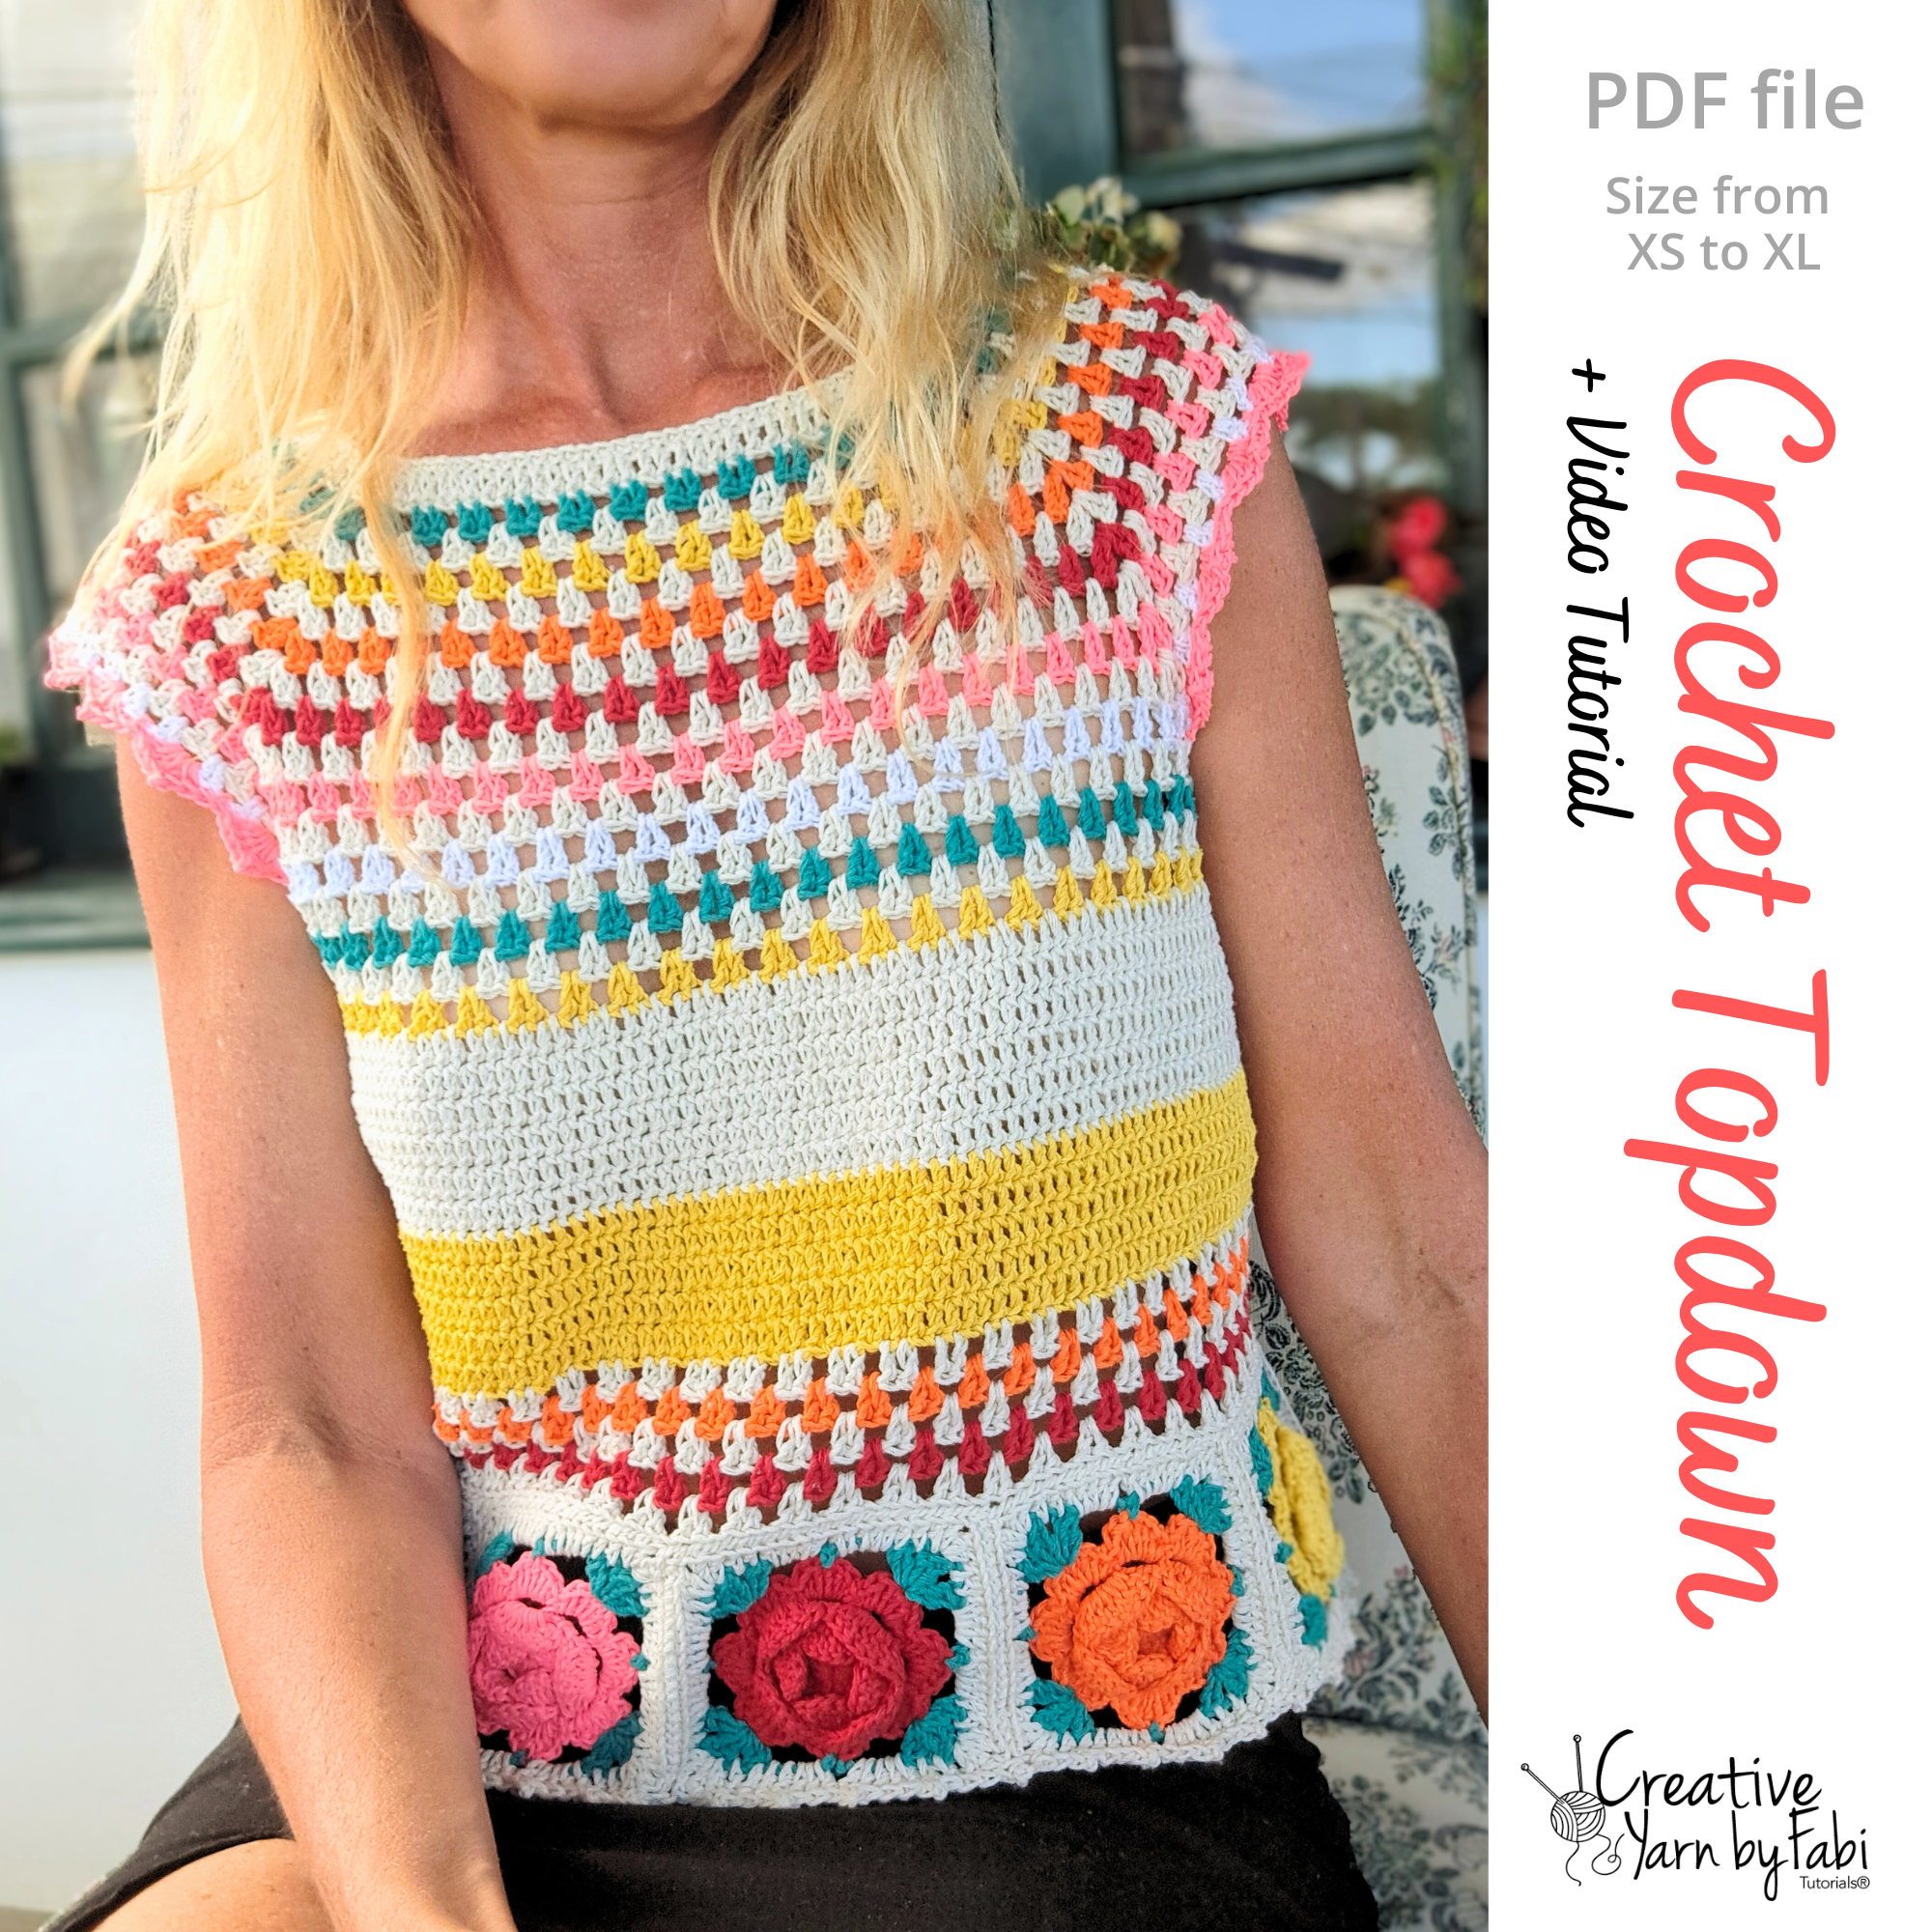 Crochet Top Down Lace PDF pattern with granny square flower - Beach Festival lace crochet top for women tutorial - Easy crochet boho top, rose granny square tutorial for beginners